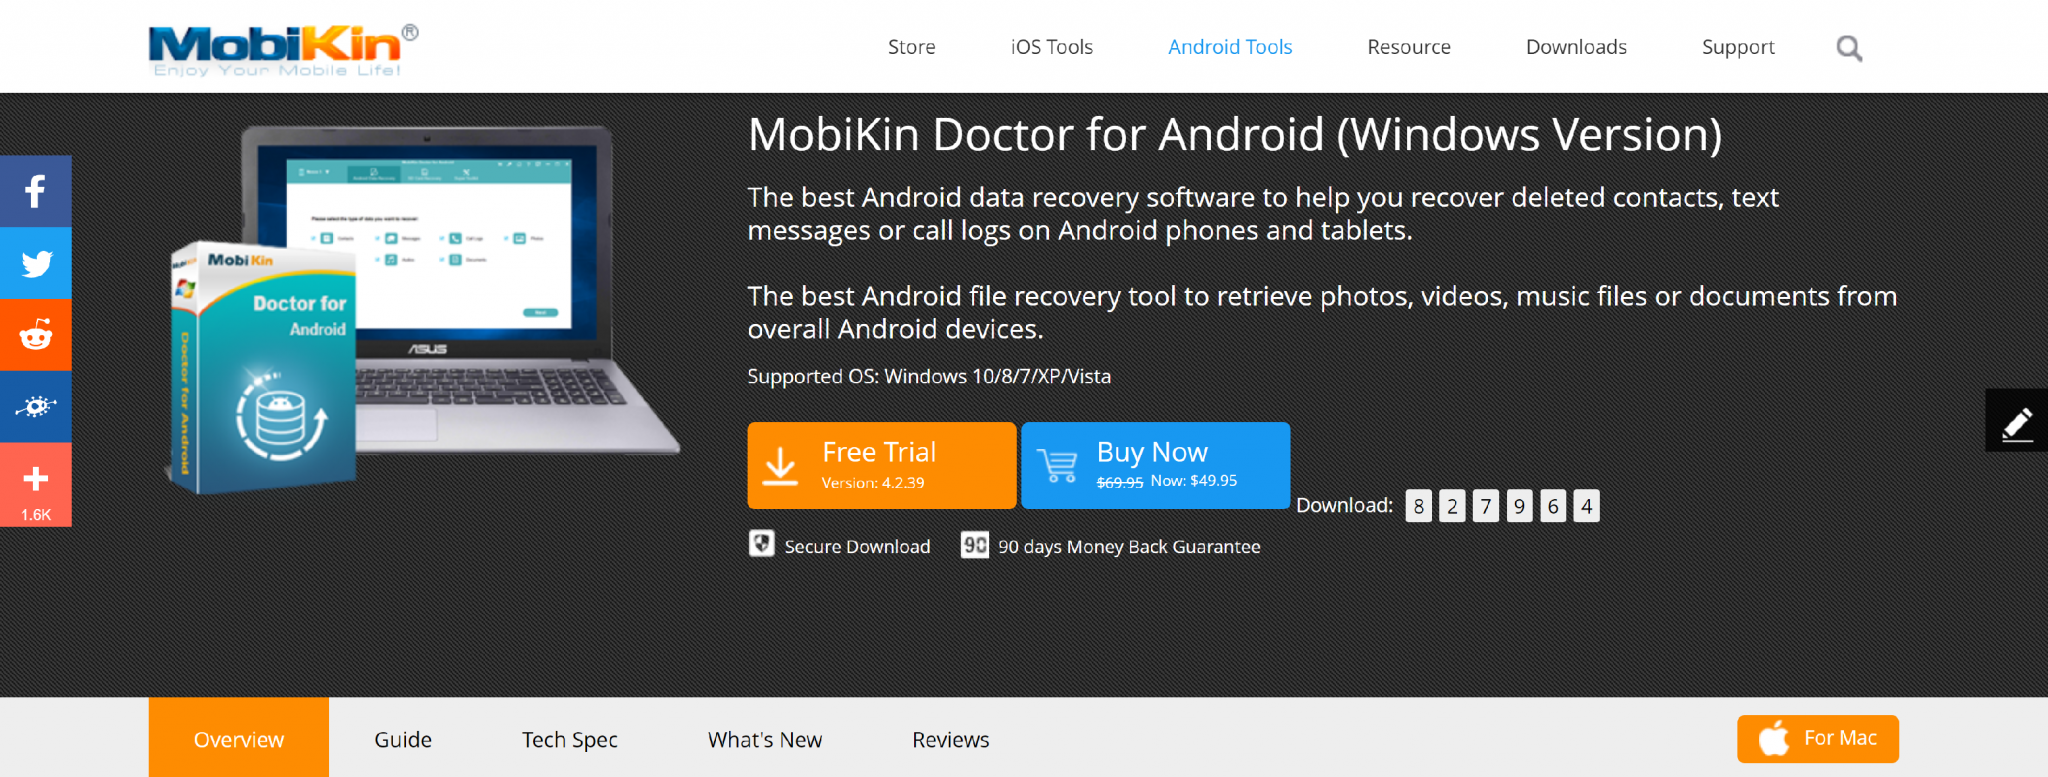 mobikin doctor for android recover sms